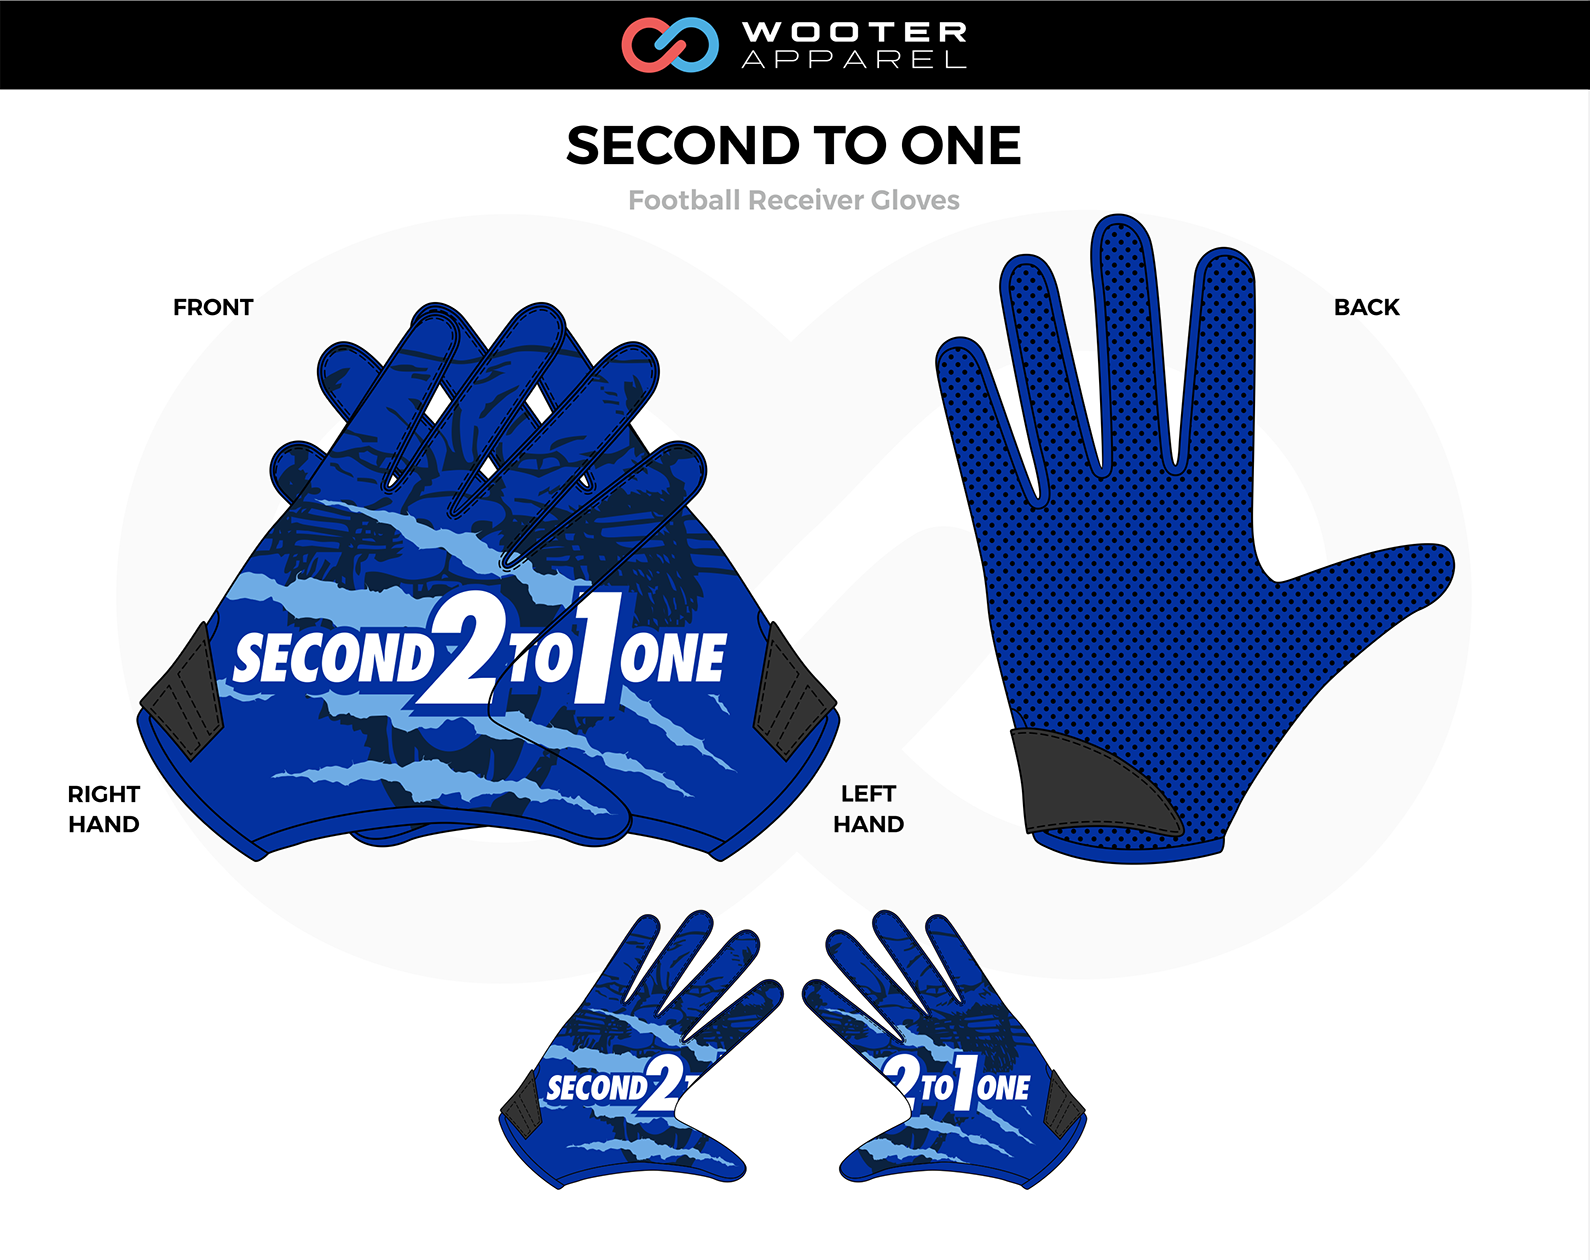 Custom Football Gloves SECOND TO ONE Blue Black White Football Receiver Gloves 